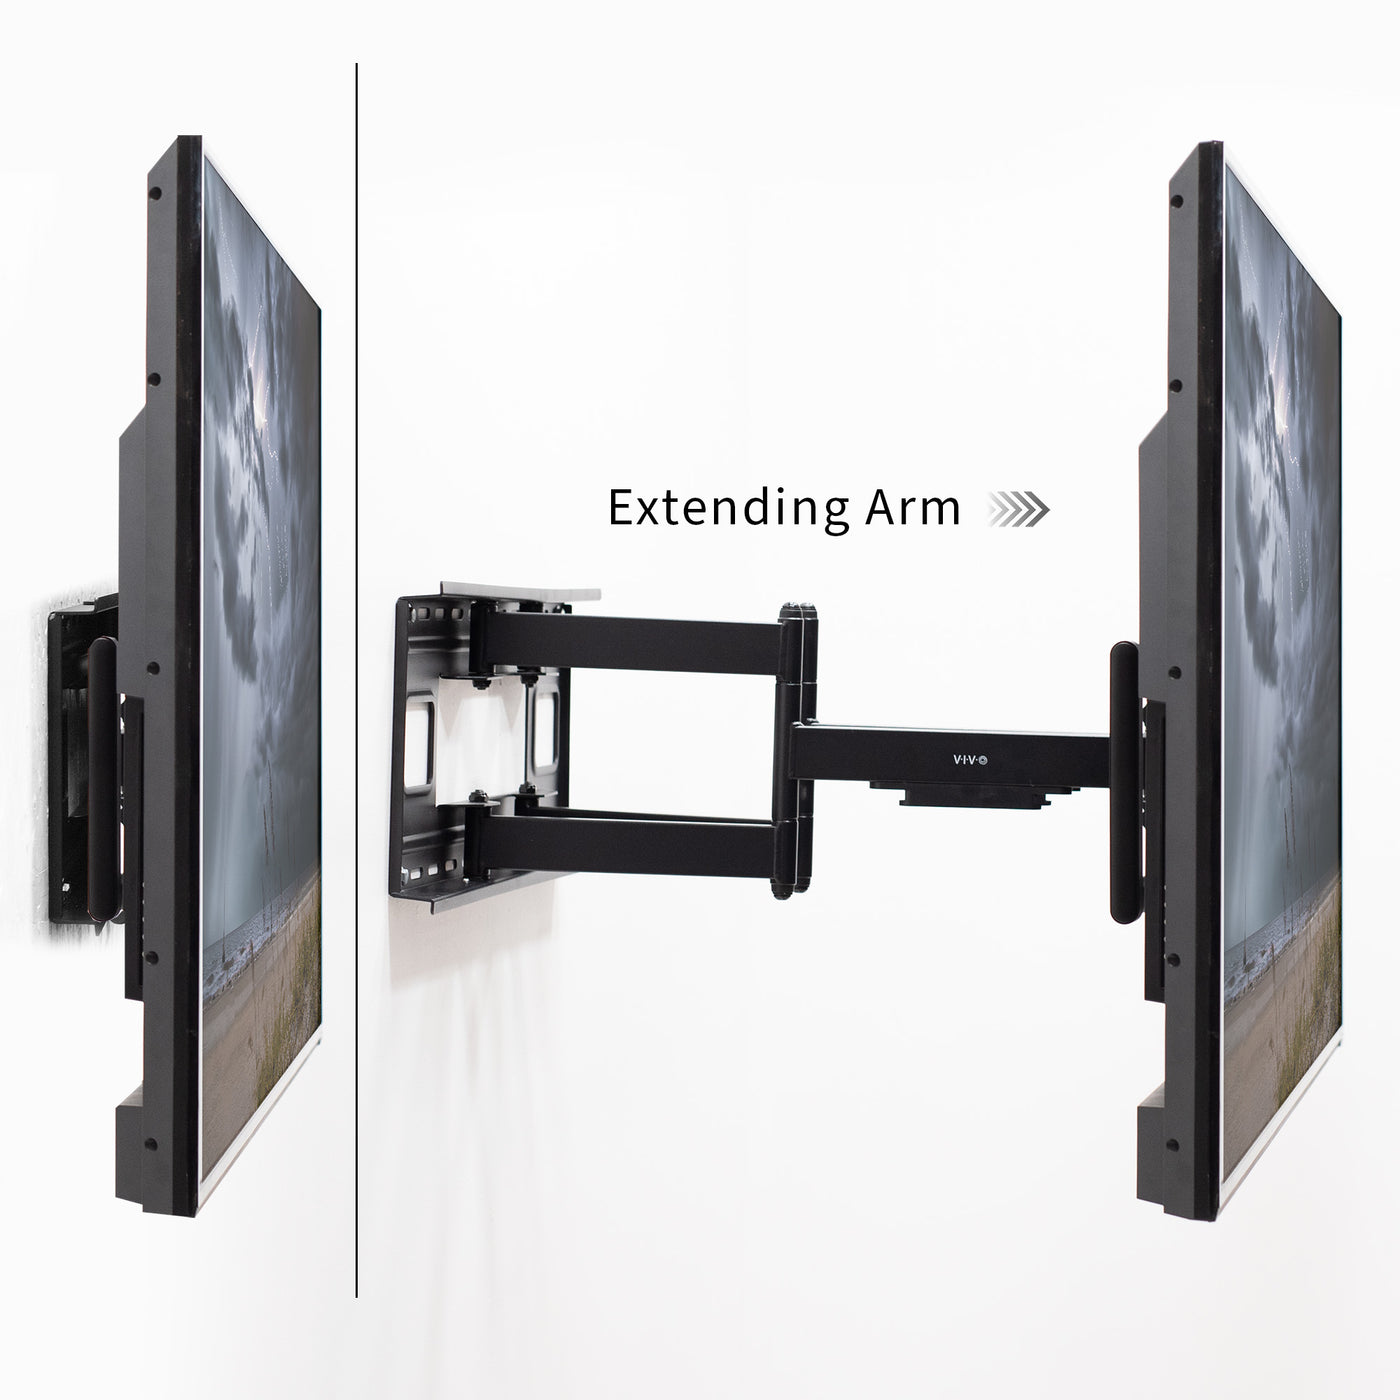 Heavy Duty 60 to 120 inch TV Full Motion Wall Mount for LCD LED Flat and Curved Screens, Long Extended Arm Swivel Mount, Max VESA 900x600mmm